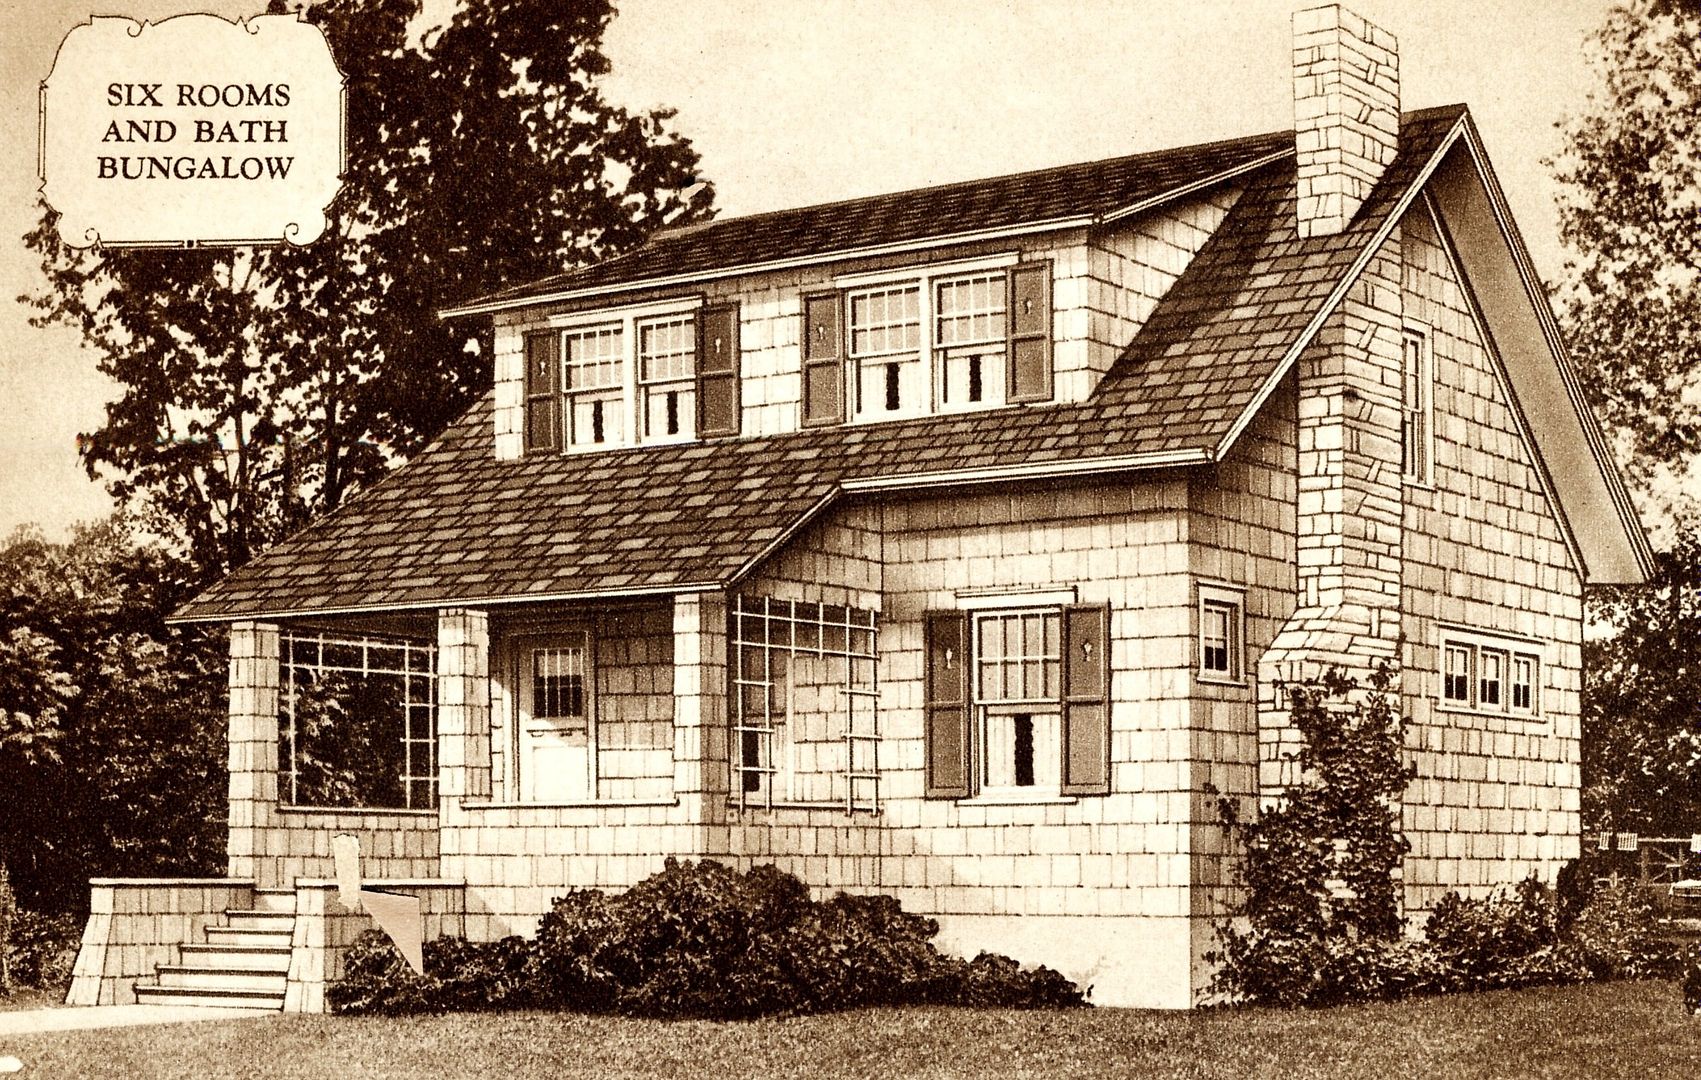 The Homewood was a fine-looking bungalow!